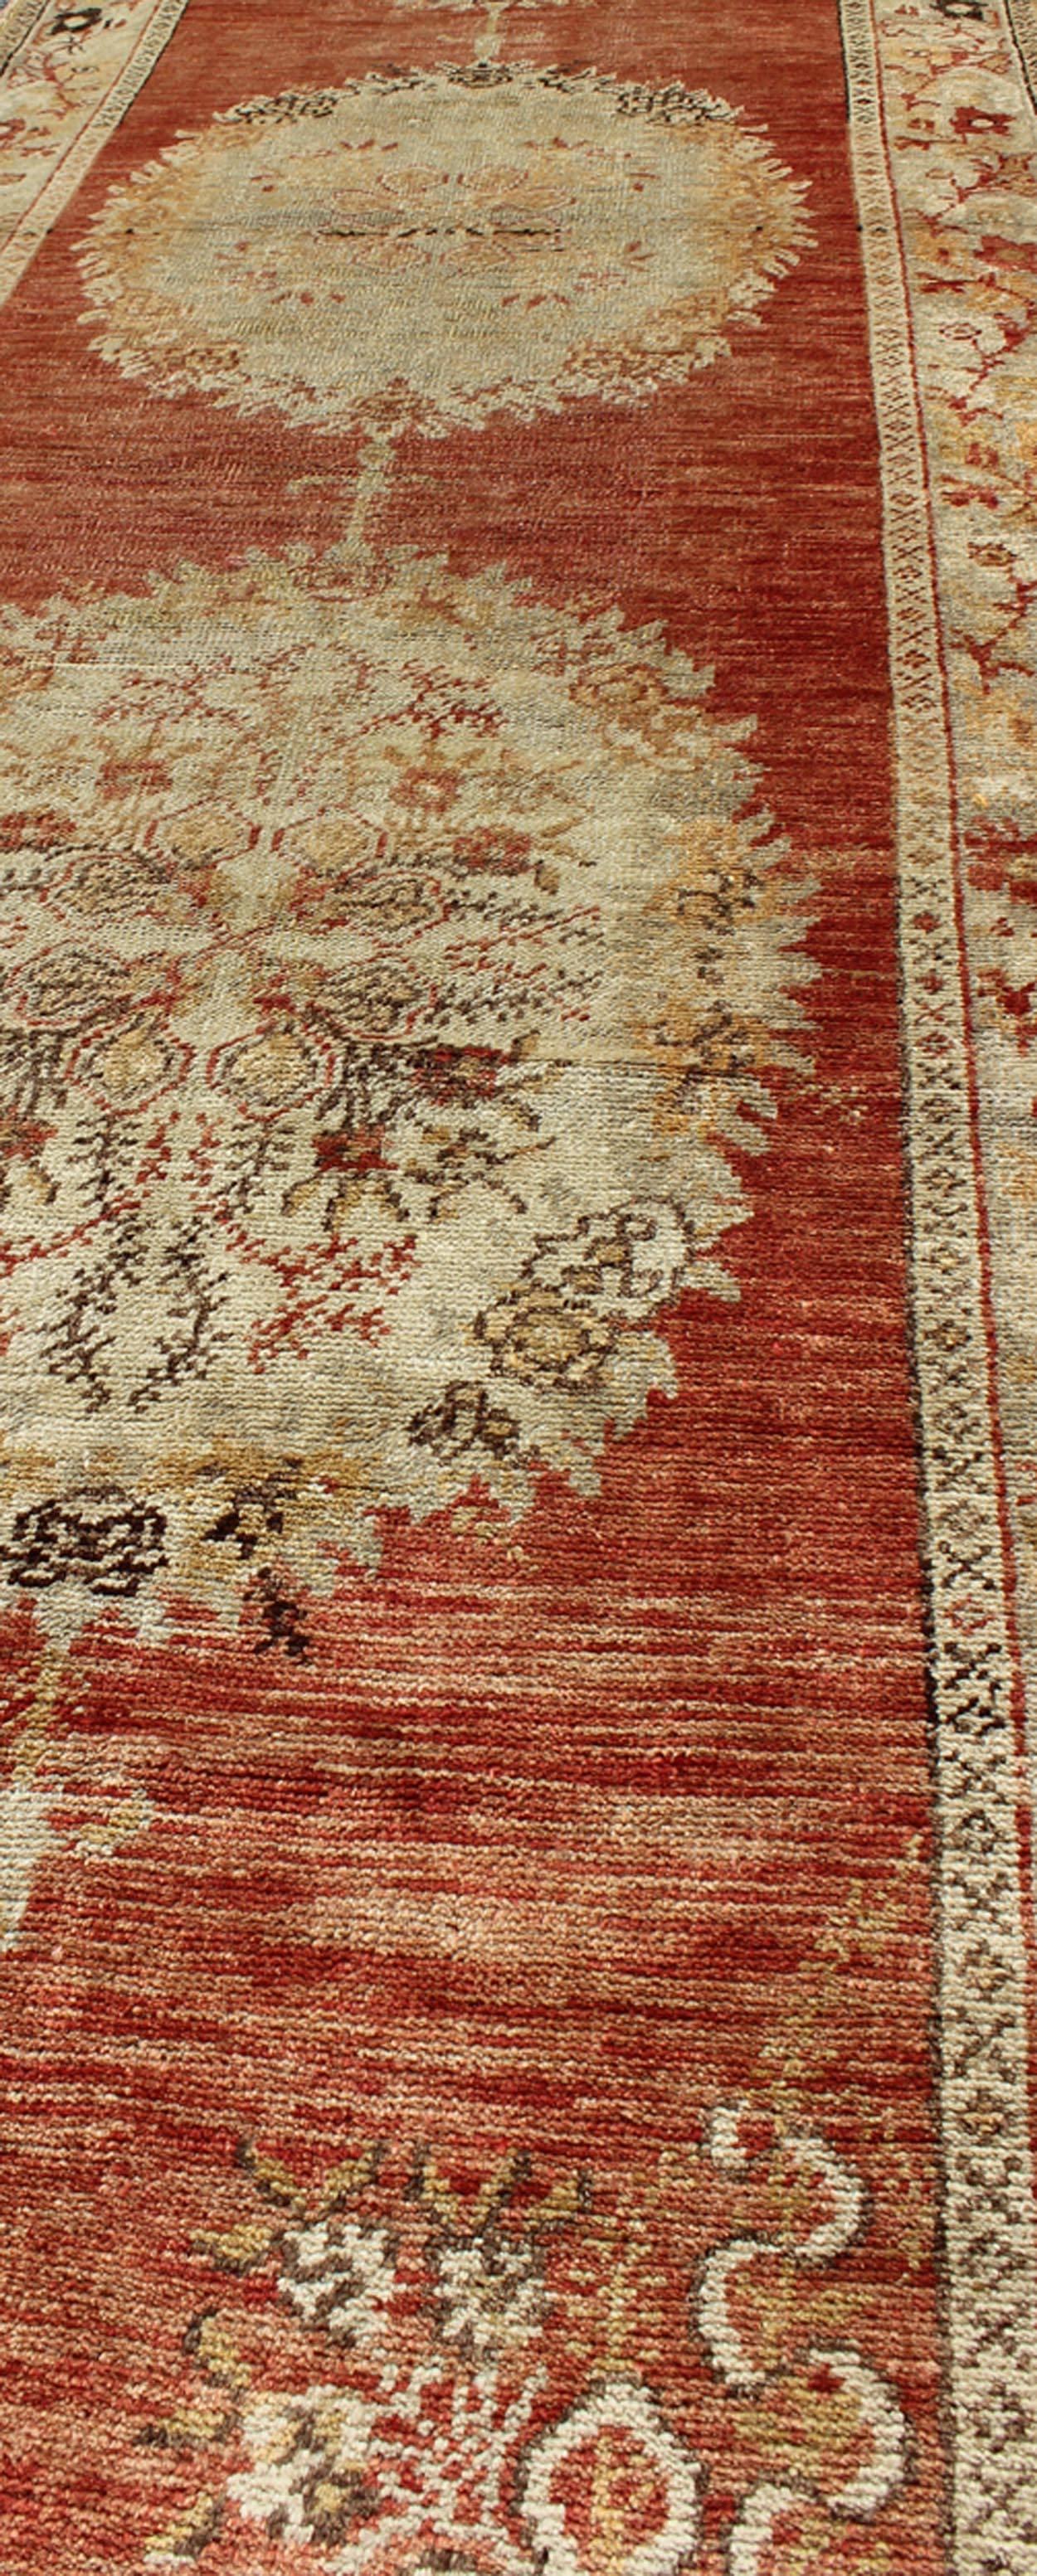 Oushak Runner With Floral Medallions in Soft Orange Red, Olive Green & Ivory In Excellent Condition For Sale In Atlanta, GA